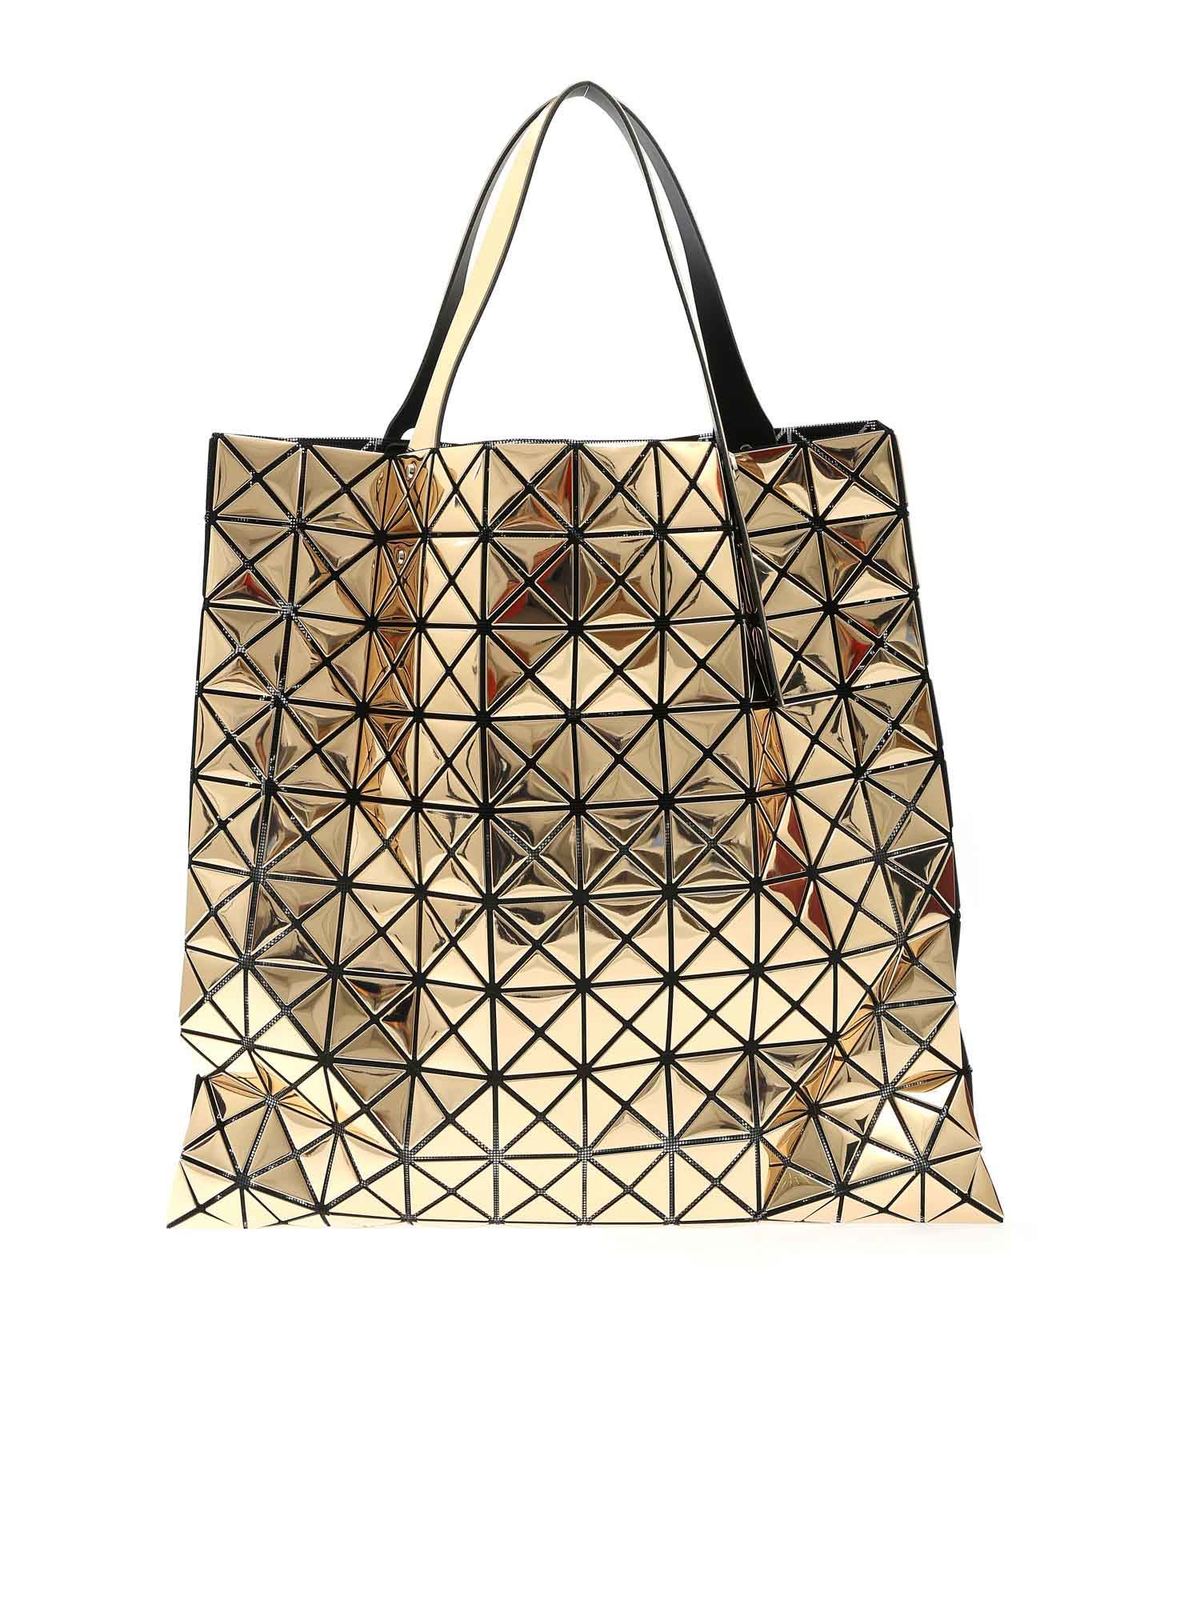 Bao Bao Issey Miyake Lucent Metallic Bag In Patinum Color In Gold ...